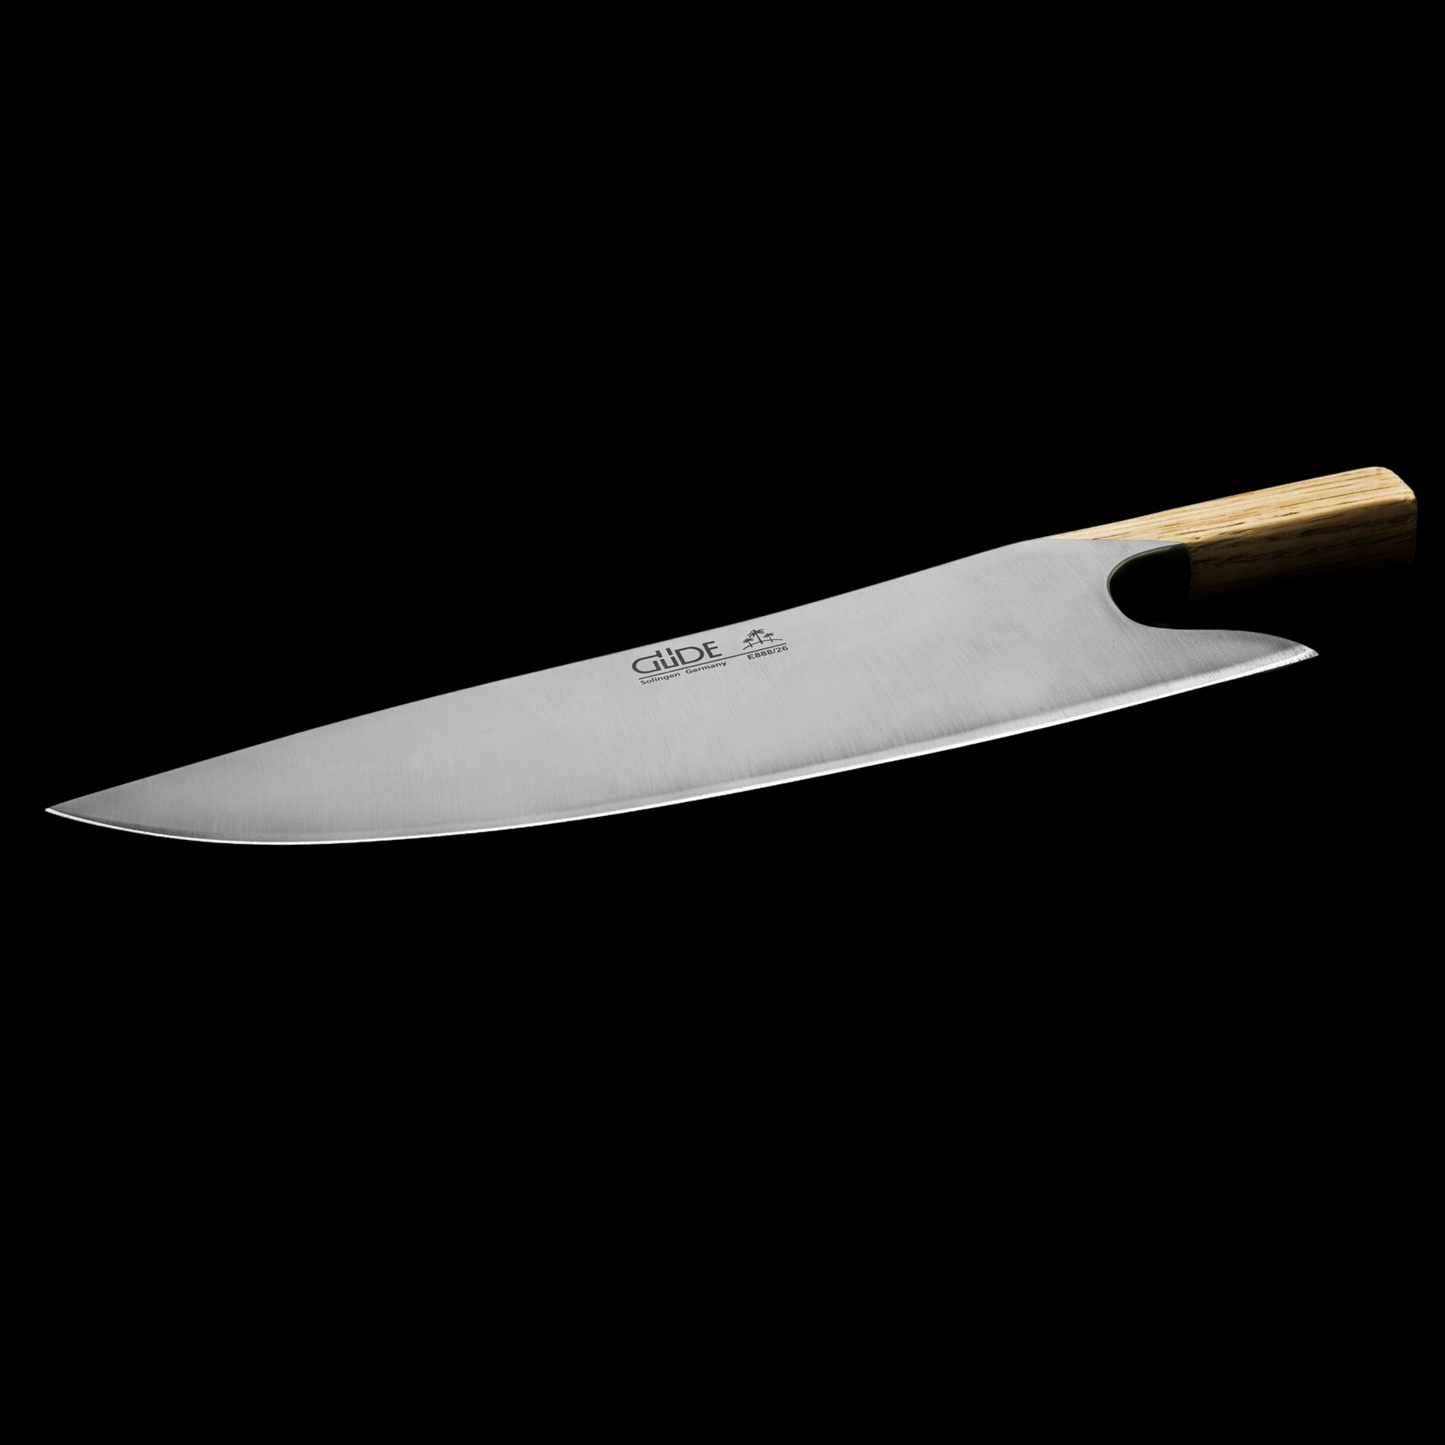 Gude "The Knife" Series Forged Multi-Use Chef's Knife 10", Oak Wood Handle - GuedeUSA